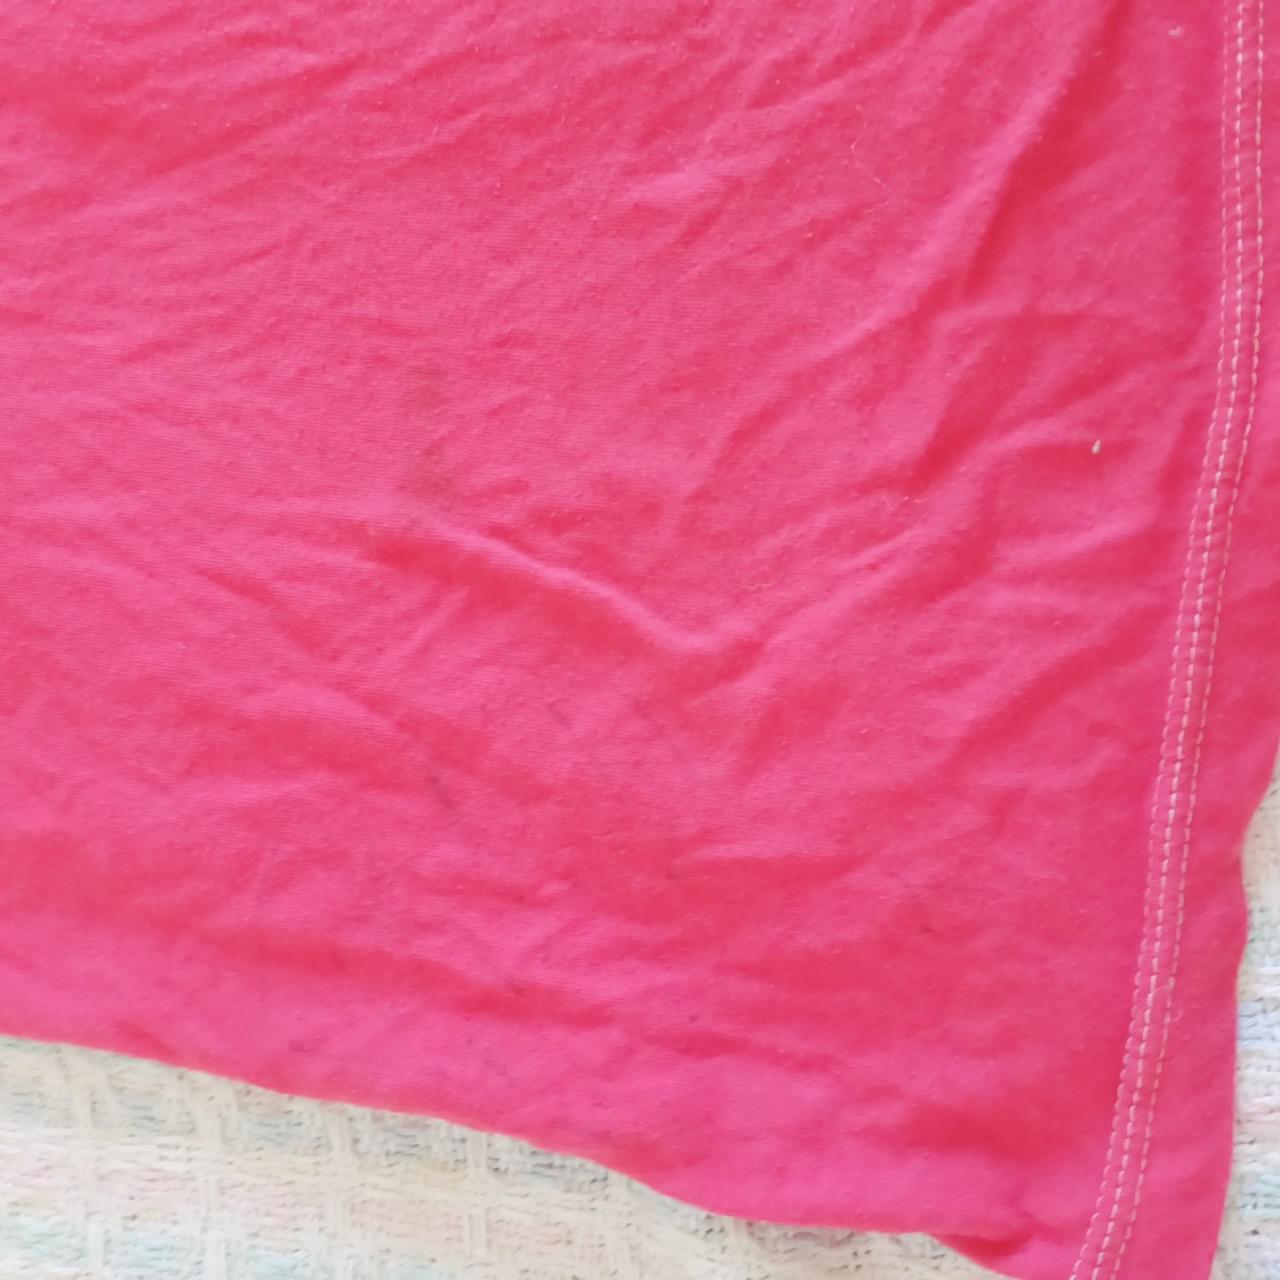 Product Image 3 - Red-ish pink Hollister Tee in